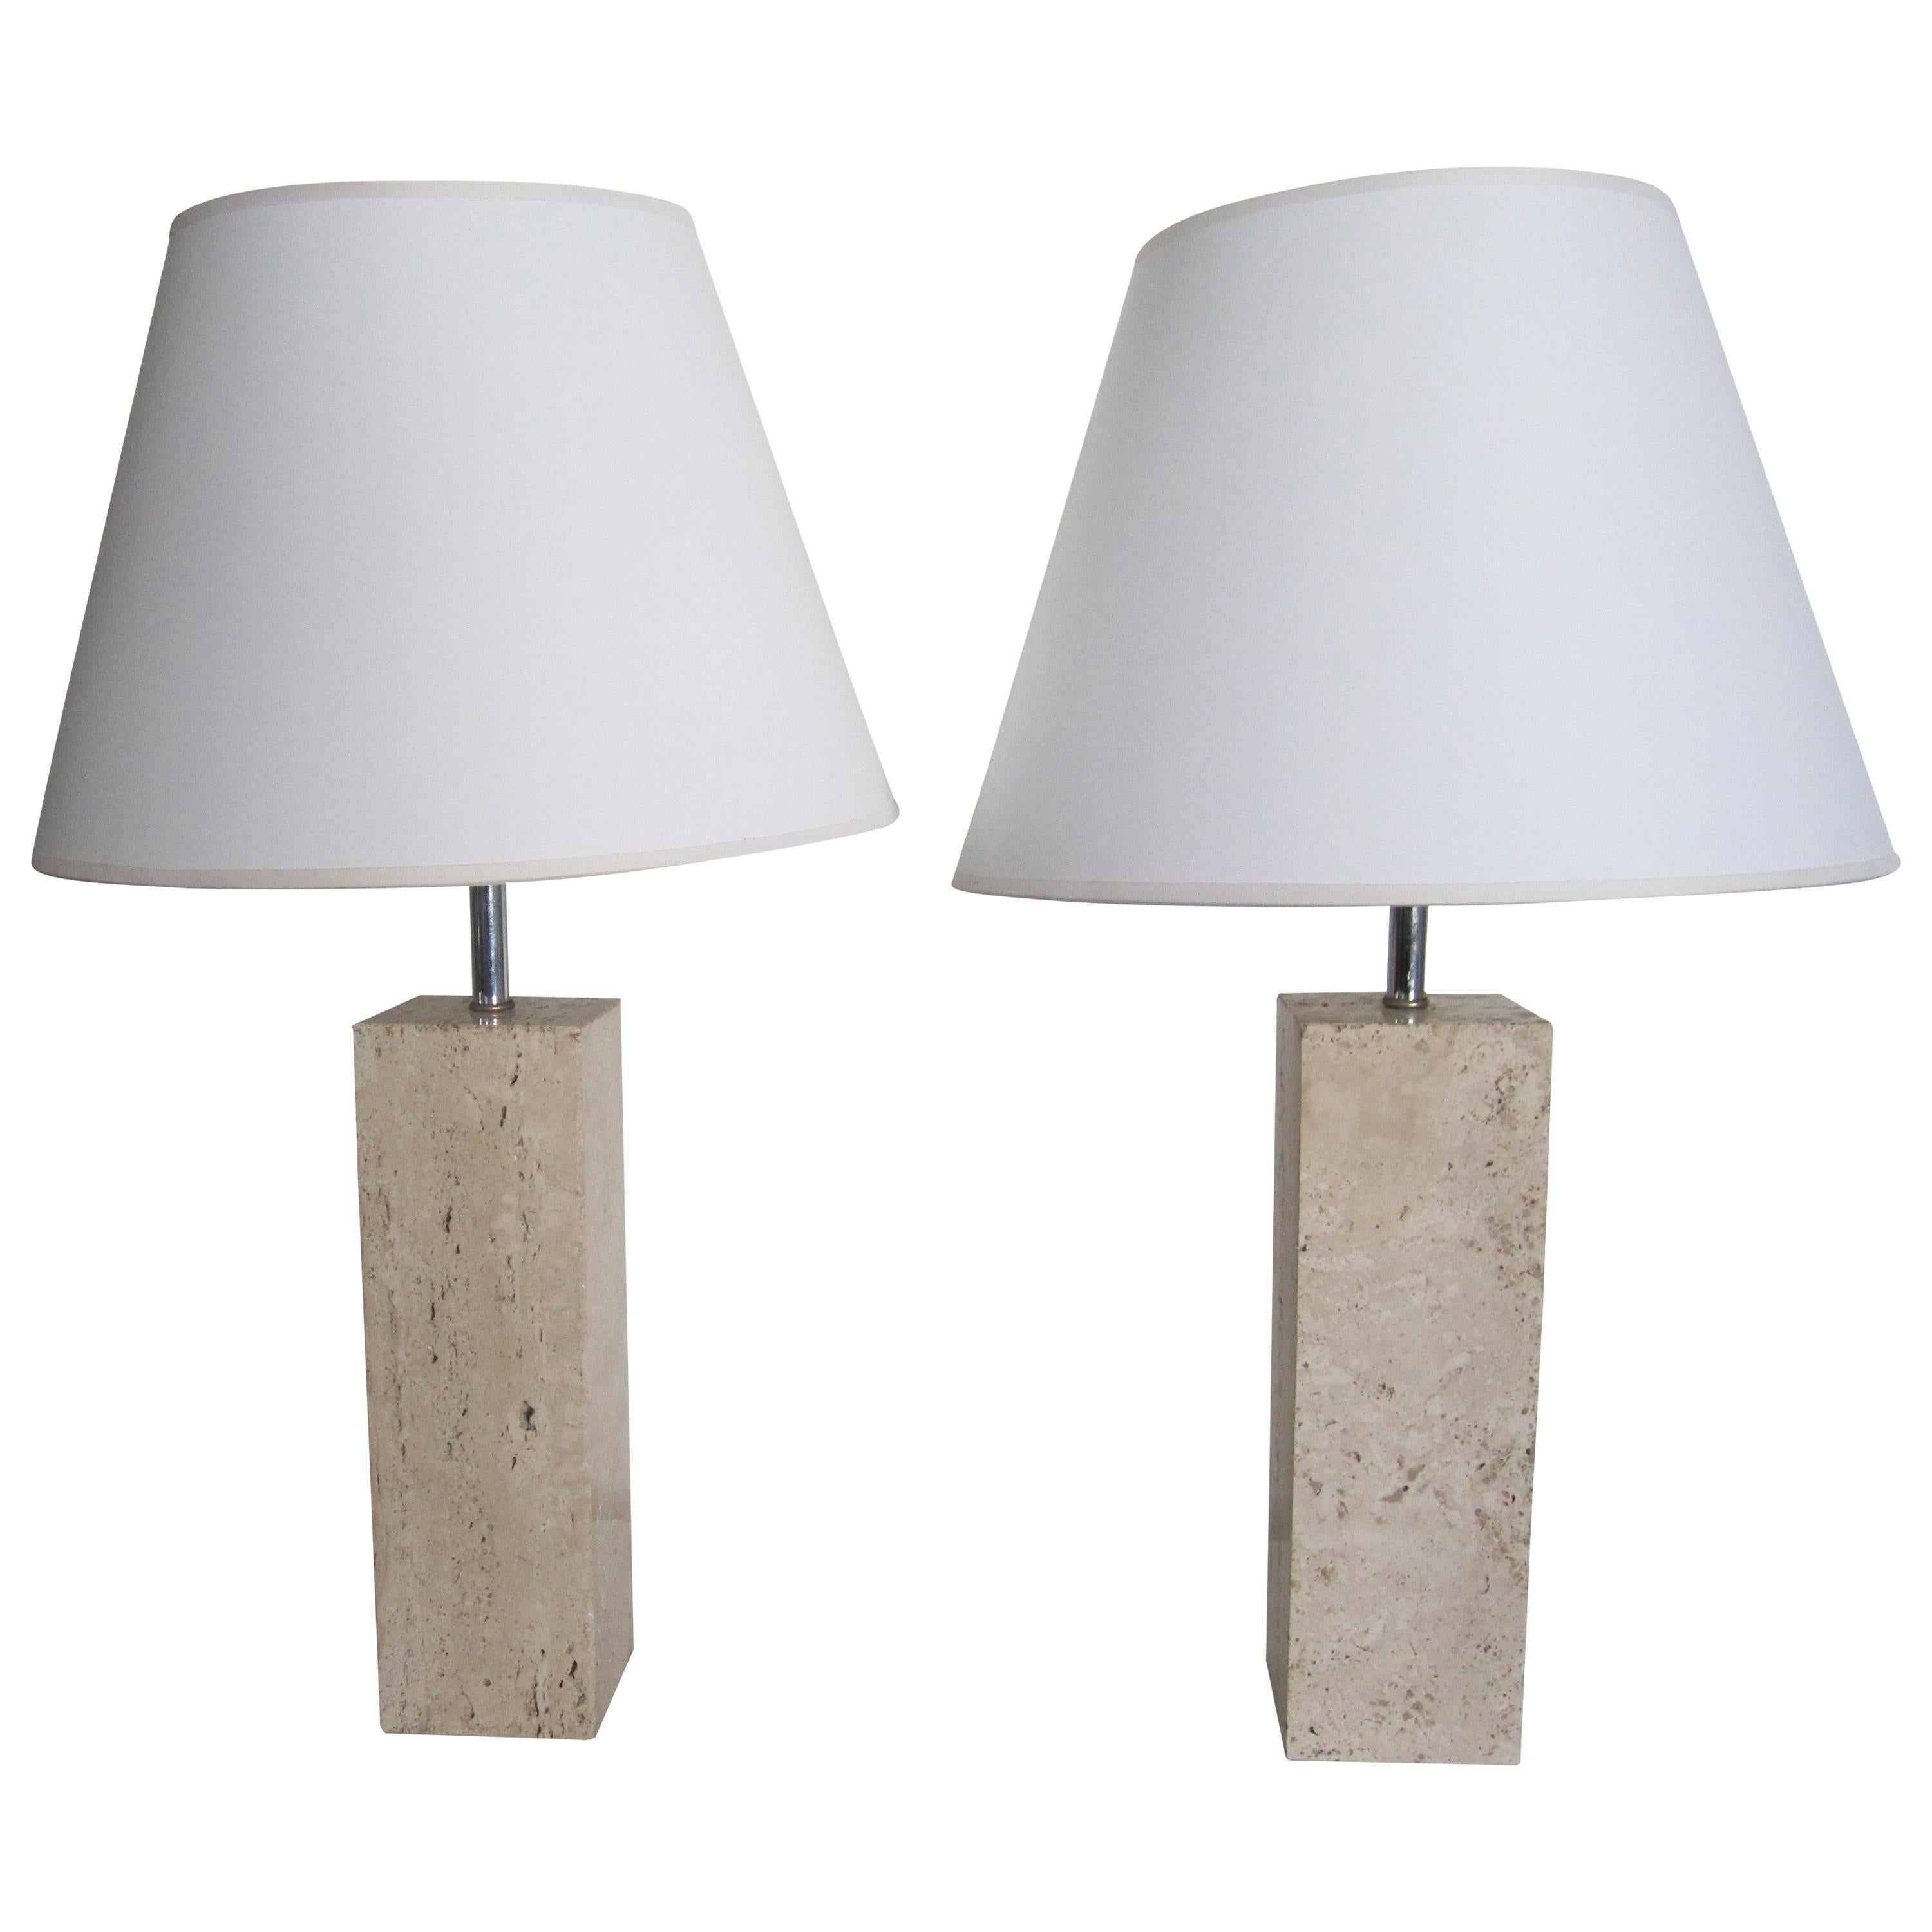 Pair Italian Modern Solid Travertine Marble Table Lamps, Italy 1970s